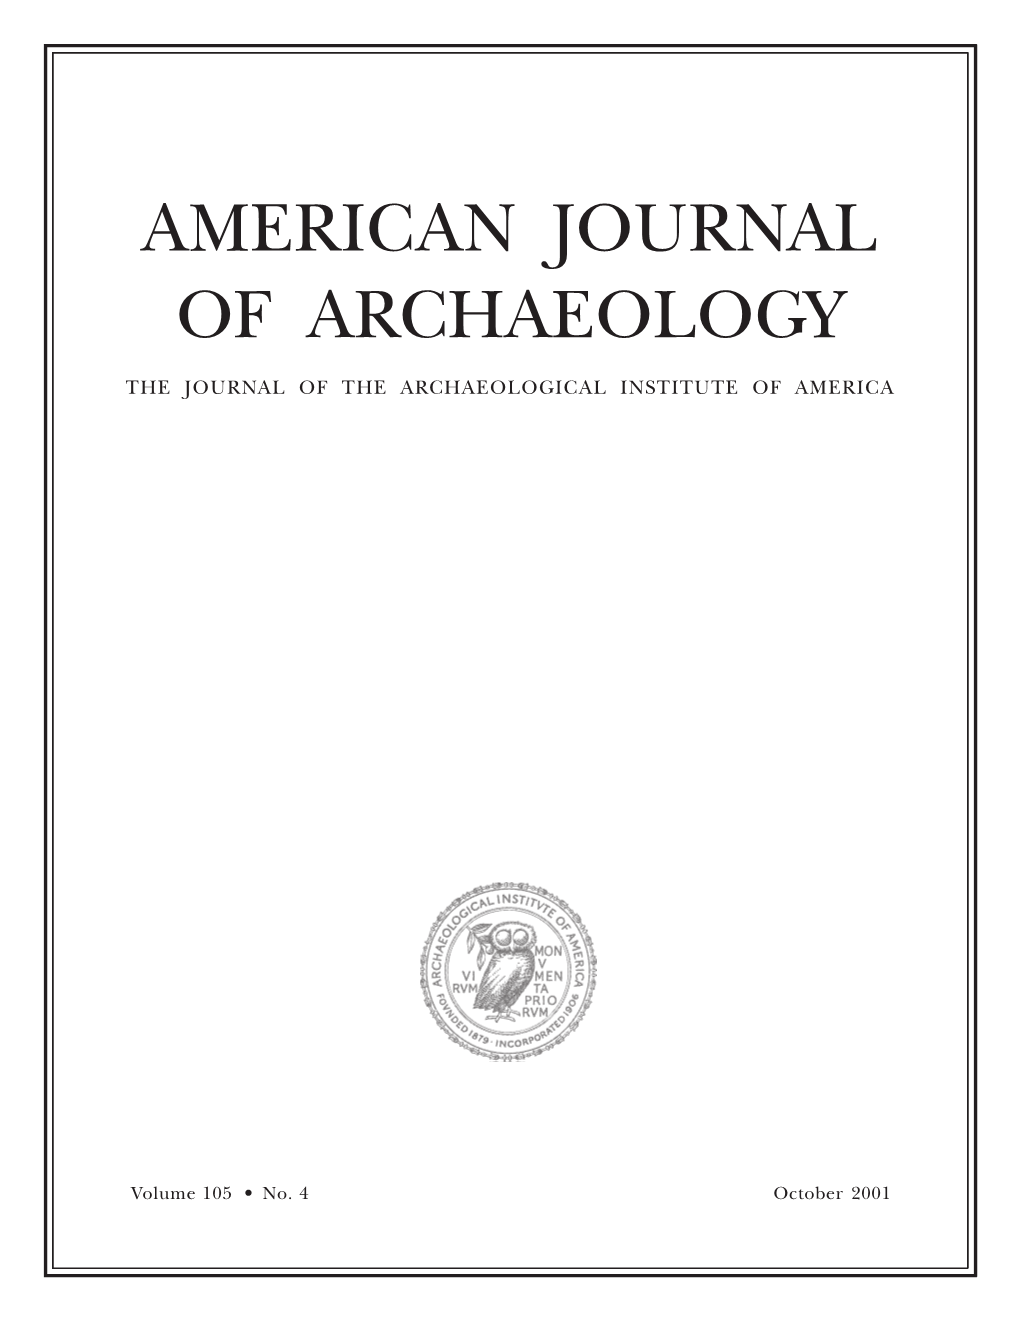 American Journal of Archaeology Article